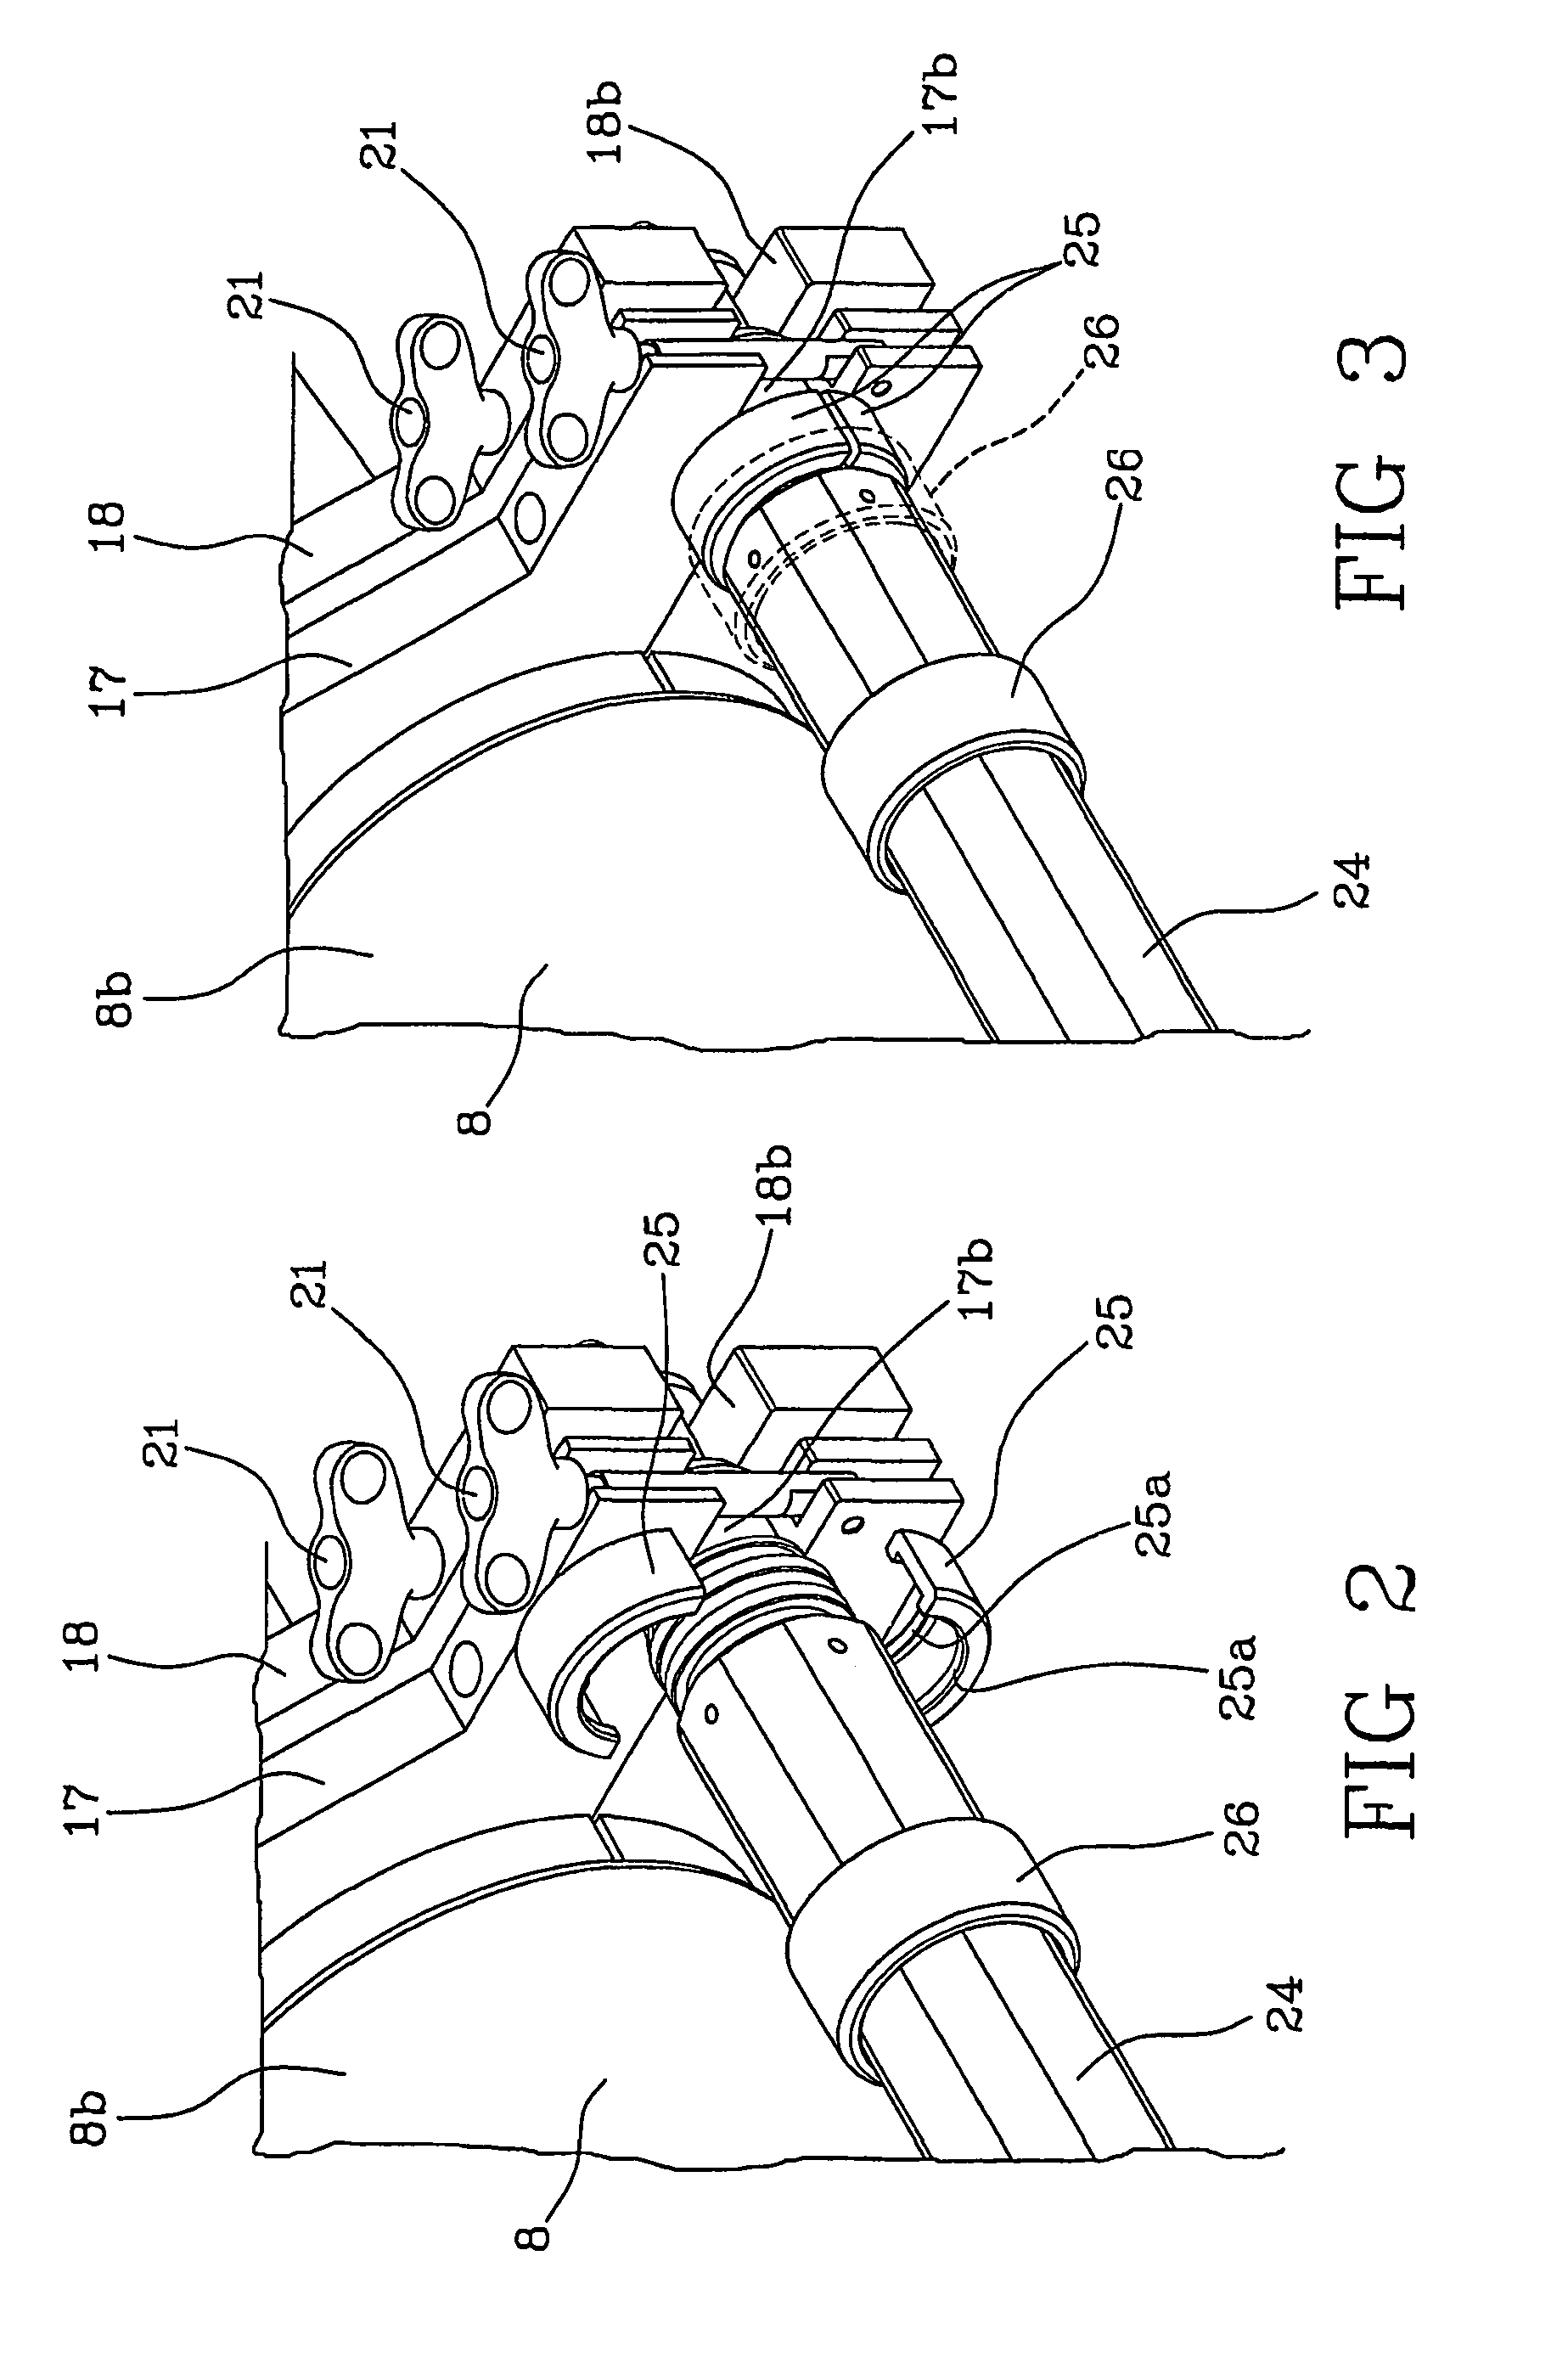 Method for joining a pair of electric cables